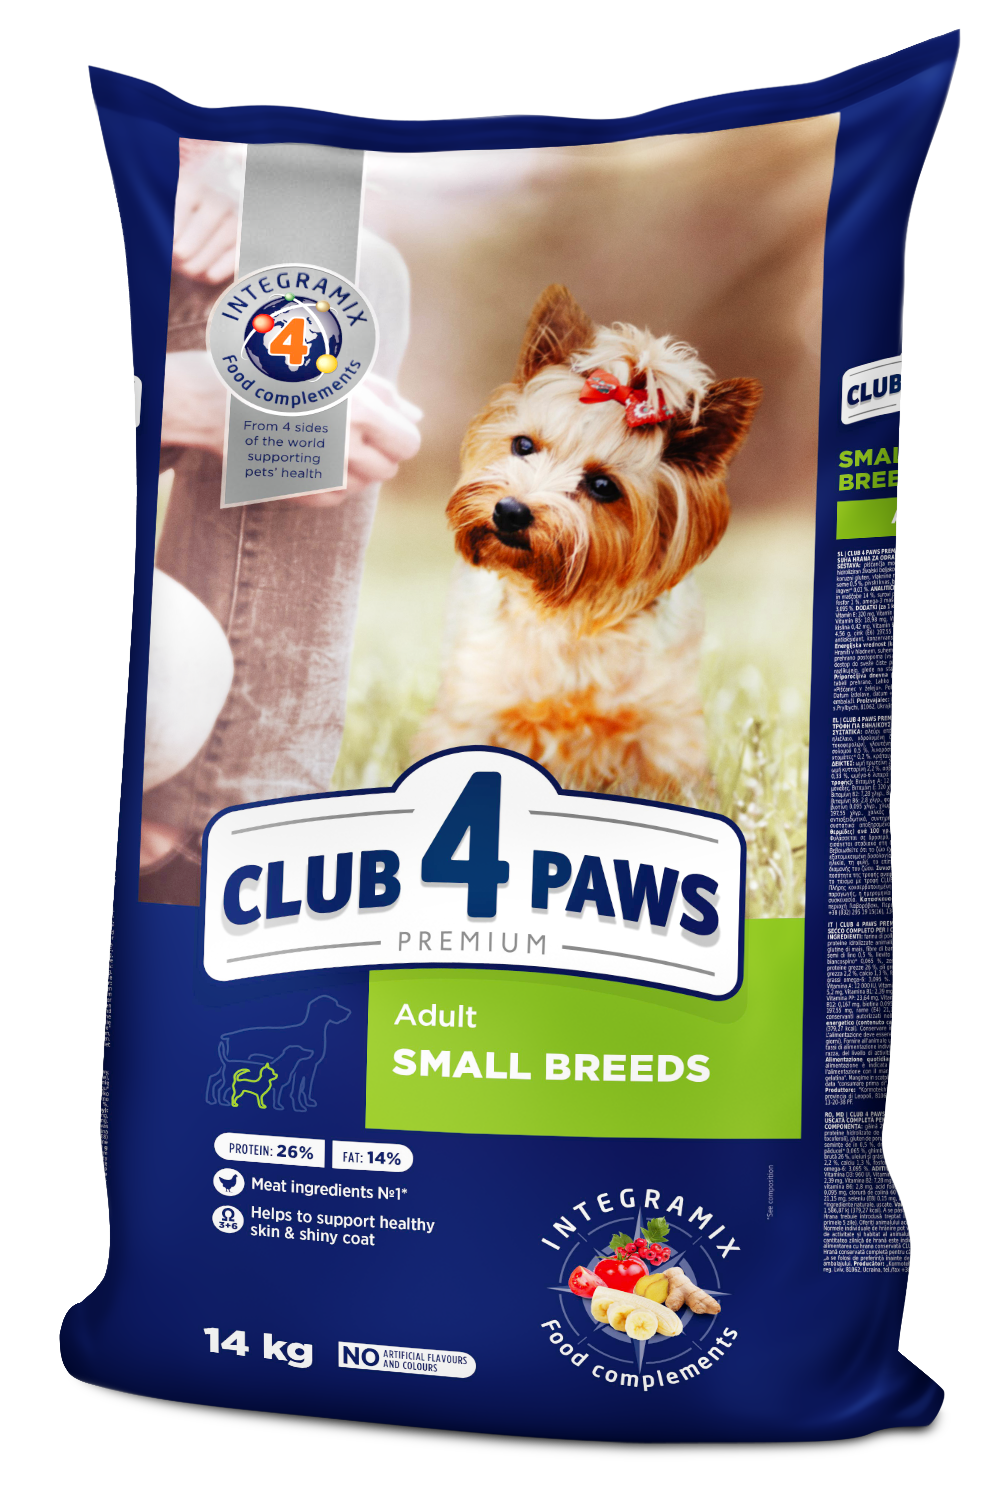 CLUB 4 PAWS Premium For Small Breeds, Complete Dry Pet Food for Adult Dogs